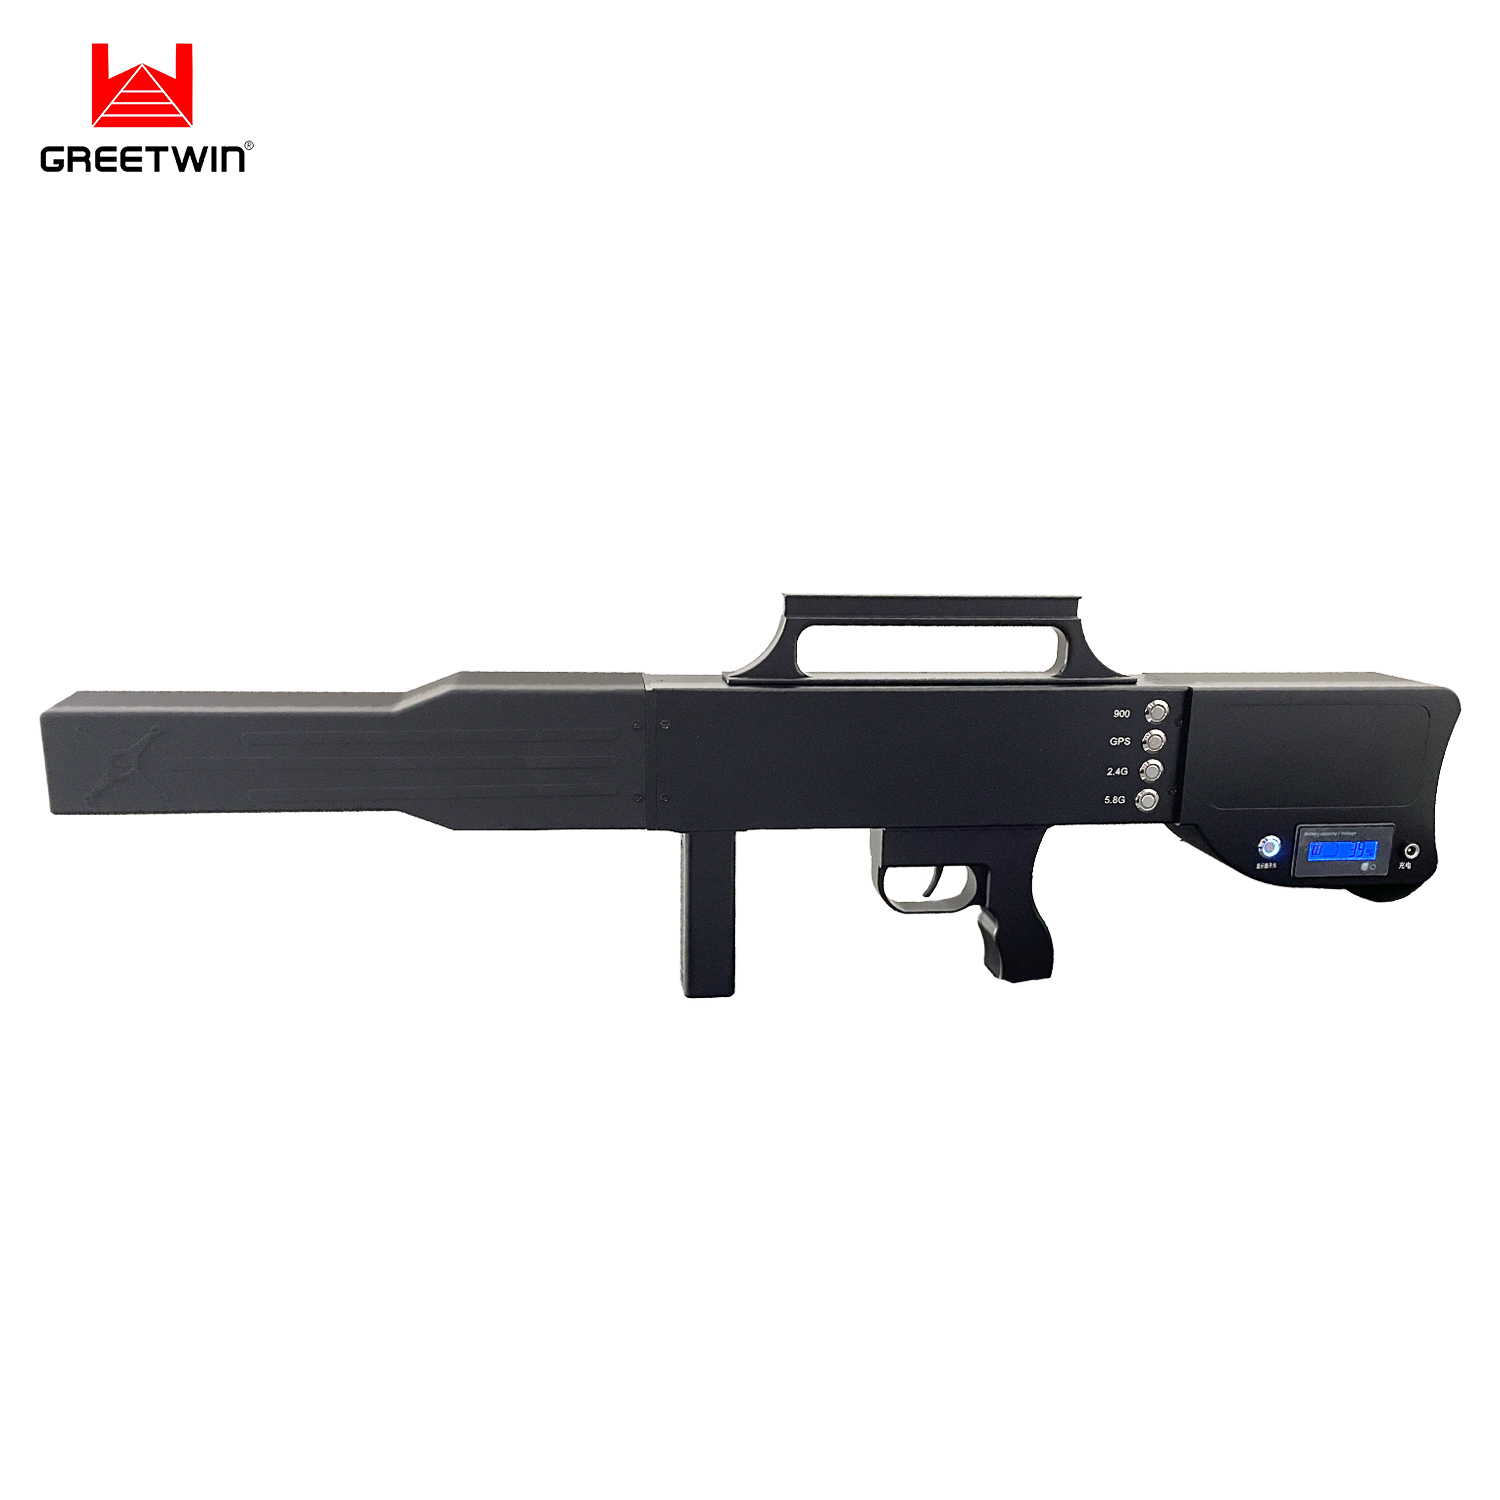 150W Drone Jammer Gun for Public Security